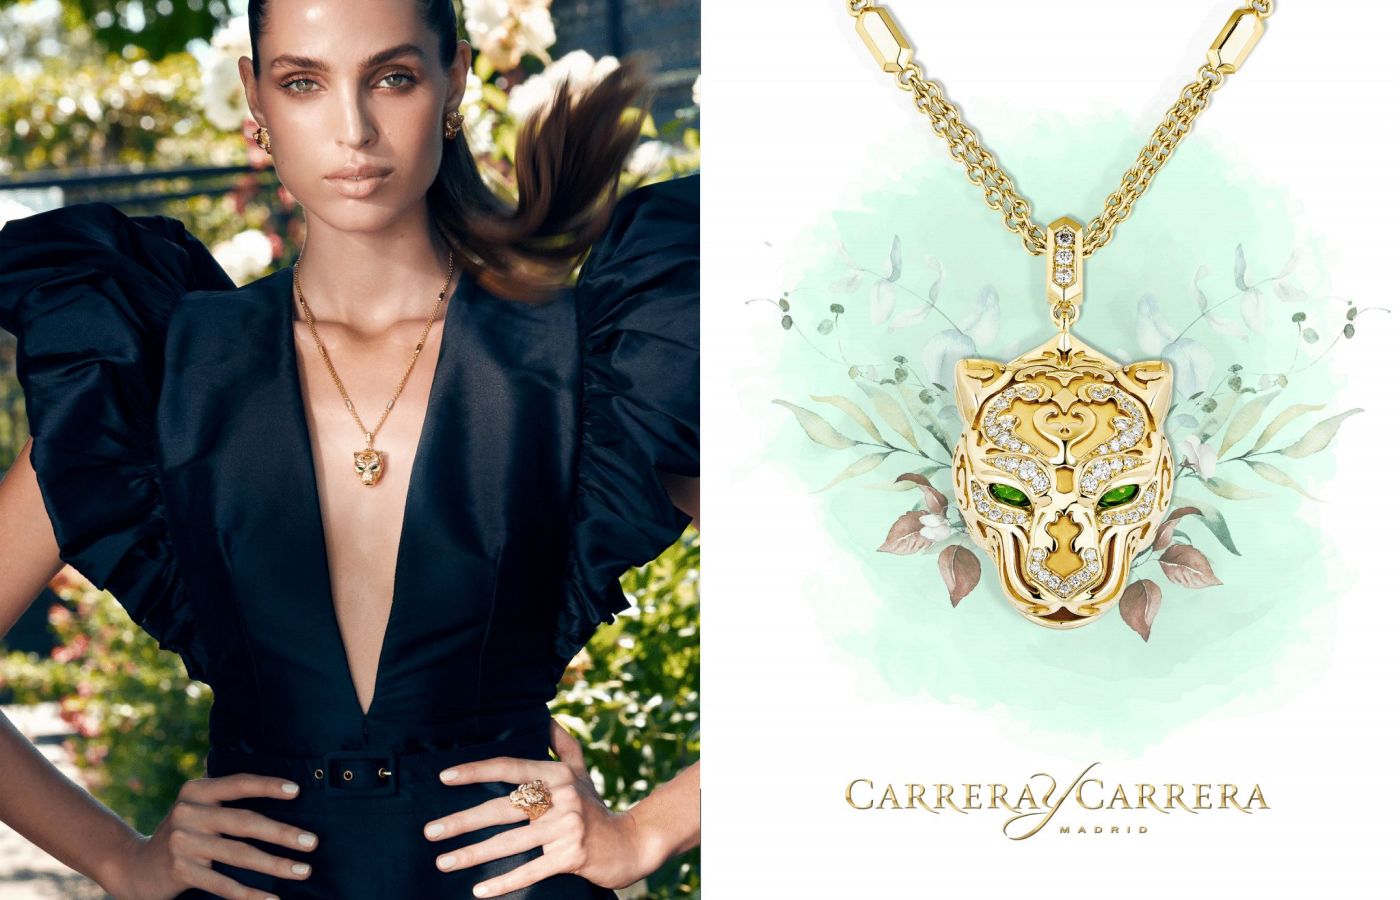 A model wears the Carrera y Carrera Zodaria pendant from the Origen collection, set with diamonds and emeralds in 18k gold 